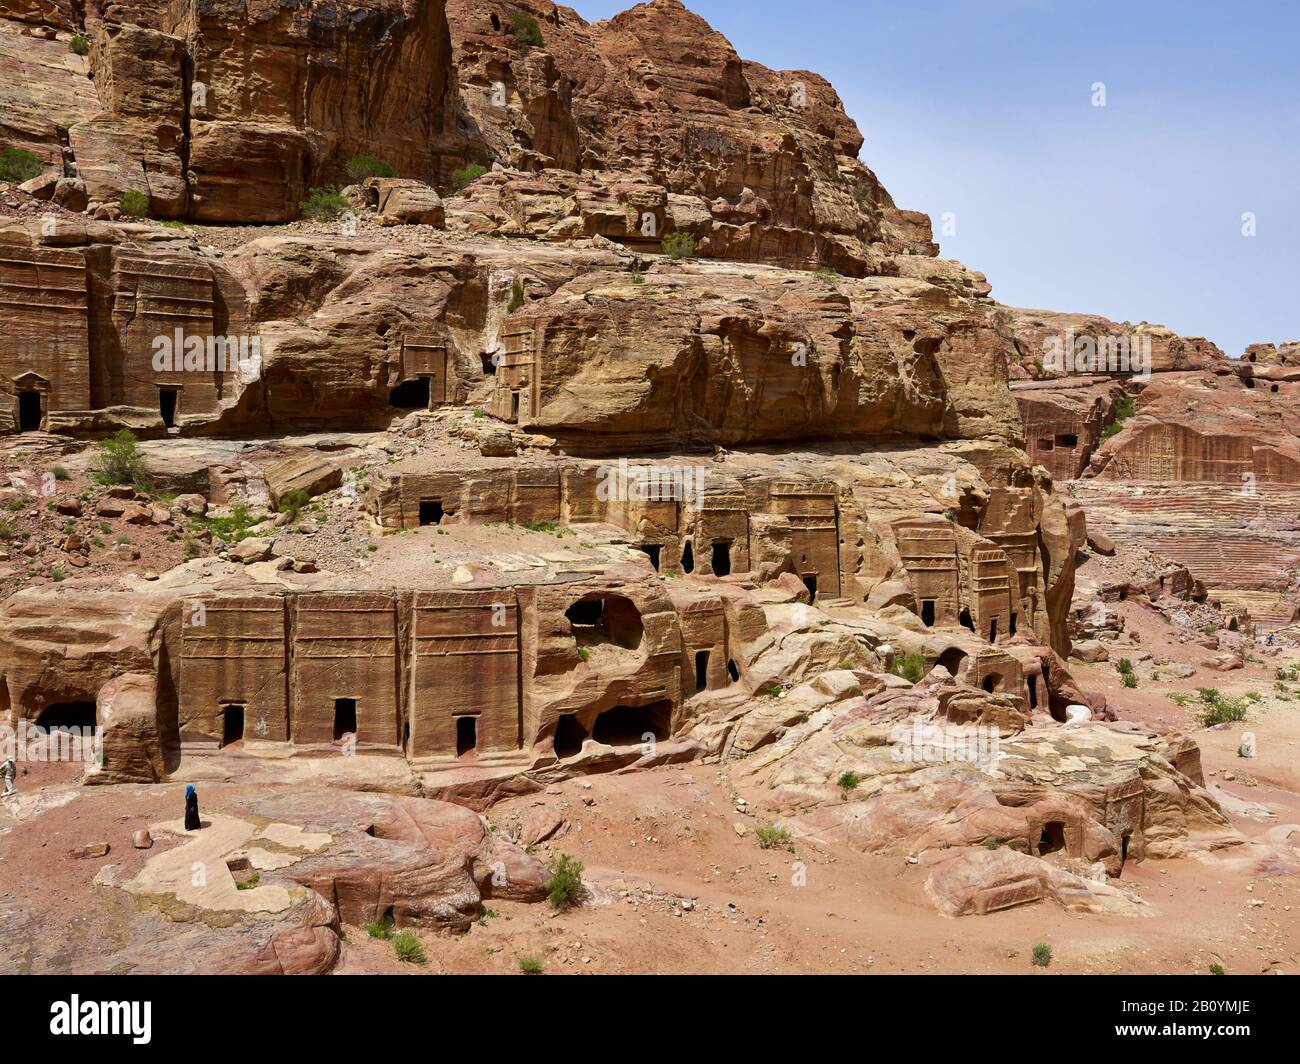 Facade street in the rock city of Petra, Jordan, Middle East, Stock Photo